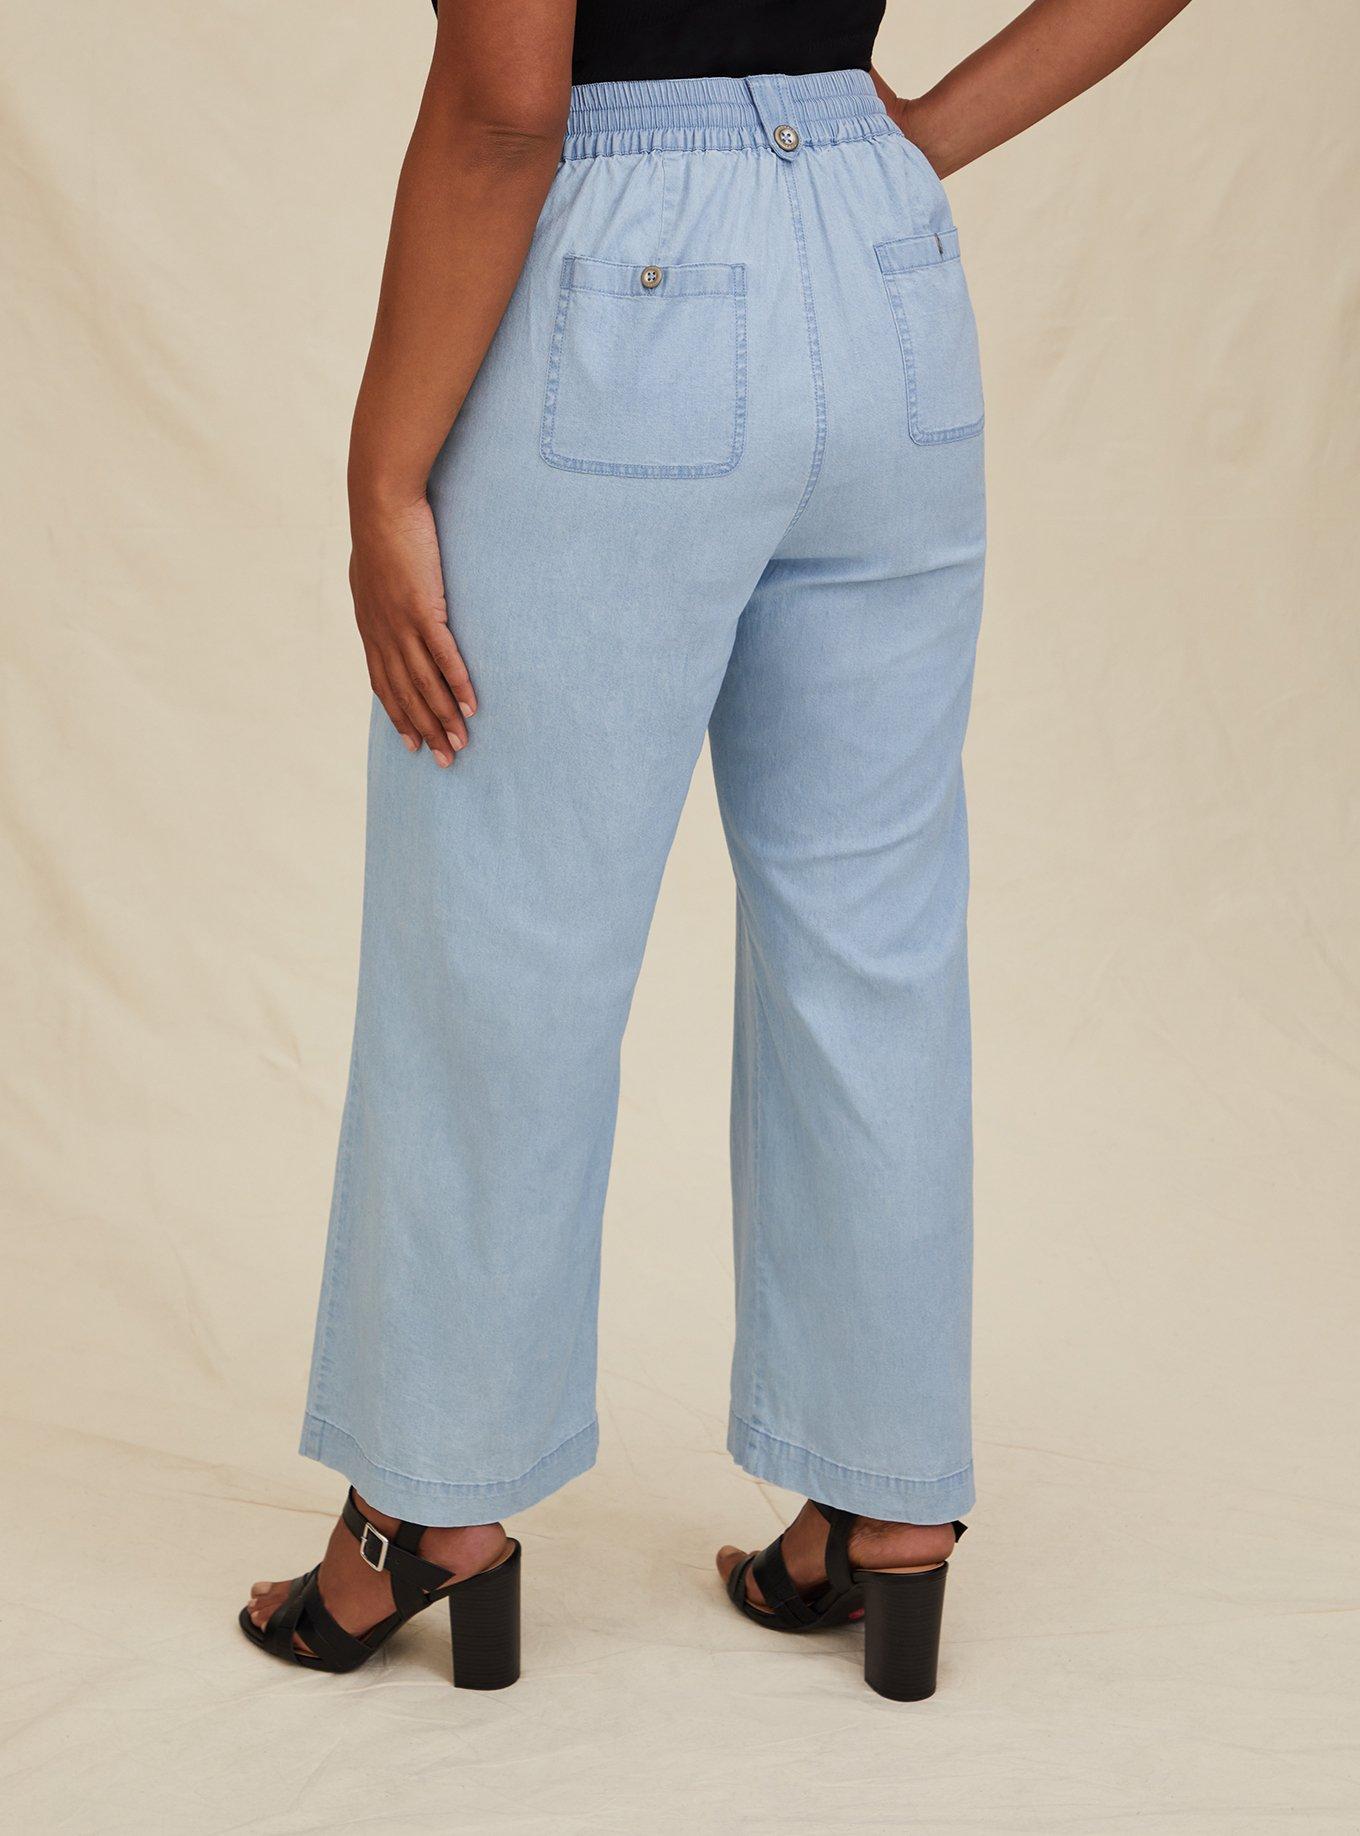 Forever 21 Plus Size High-Waisted Chambray Pants  Plus size clothing  stores, Chambray pants, Womens fashion casual chic